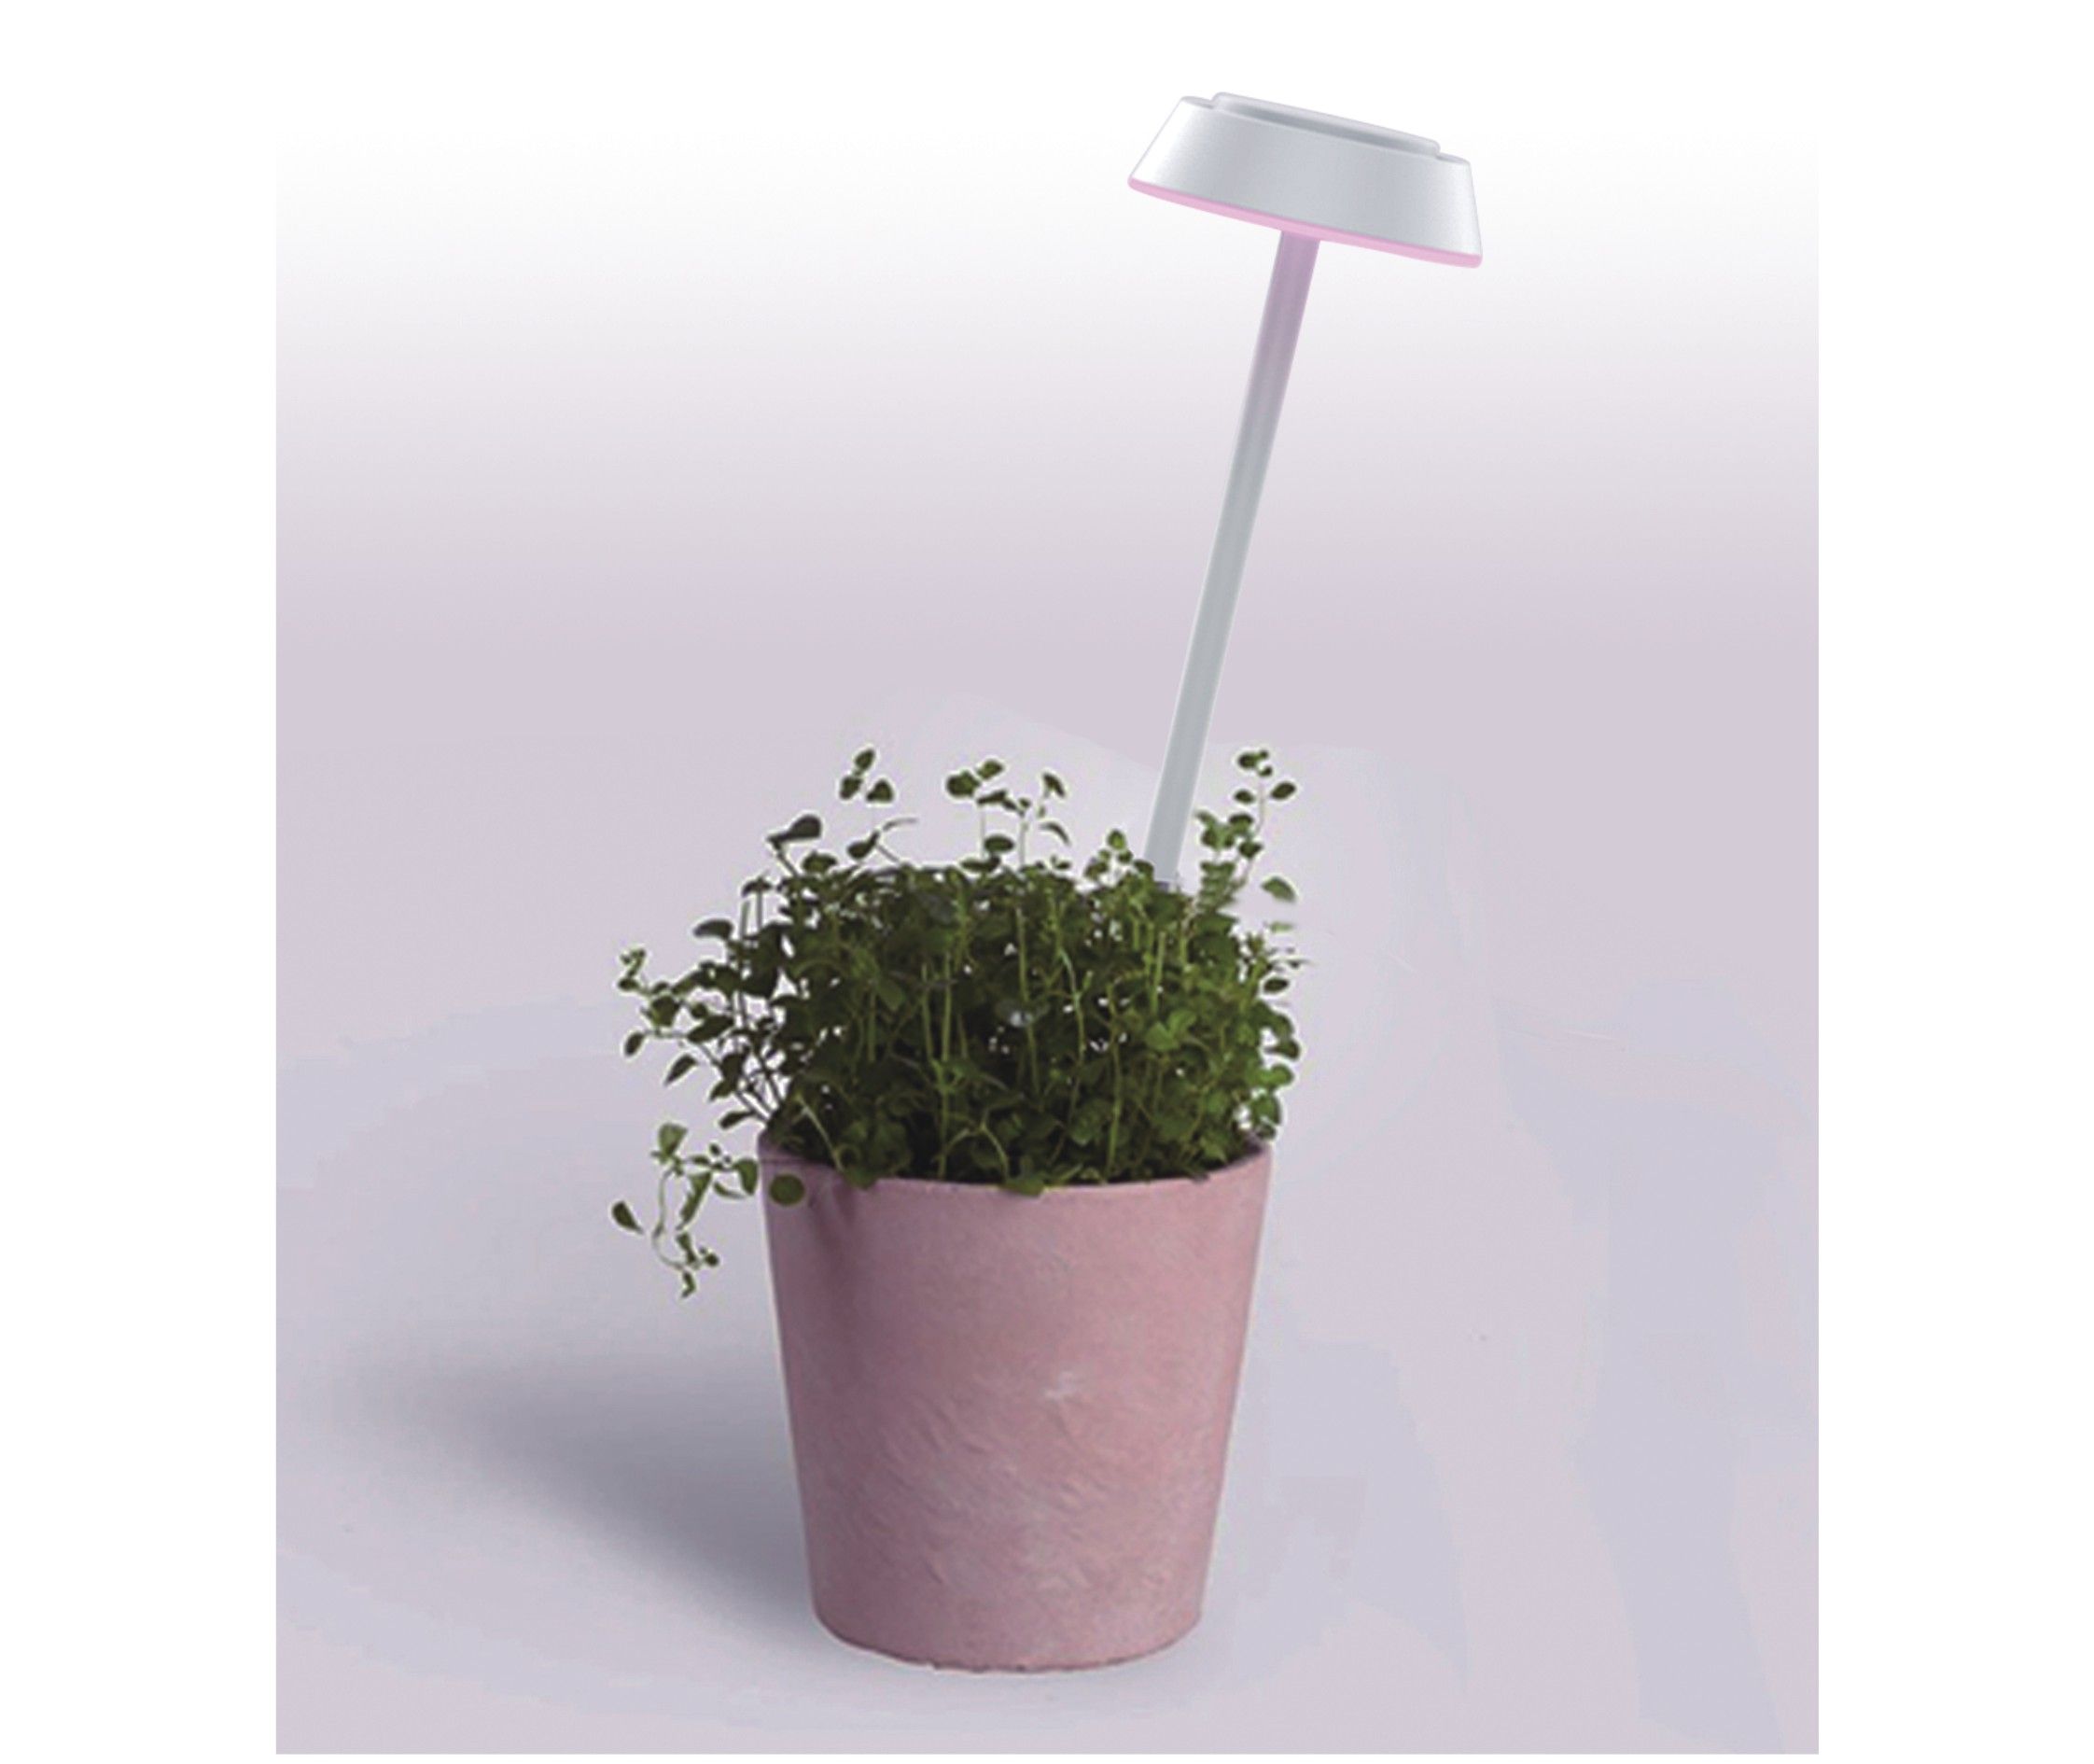 2-in-1 LED Plant Grow Light - PNLED-147. 